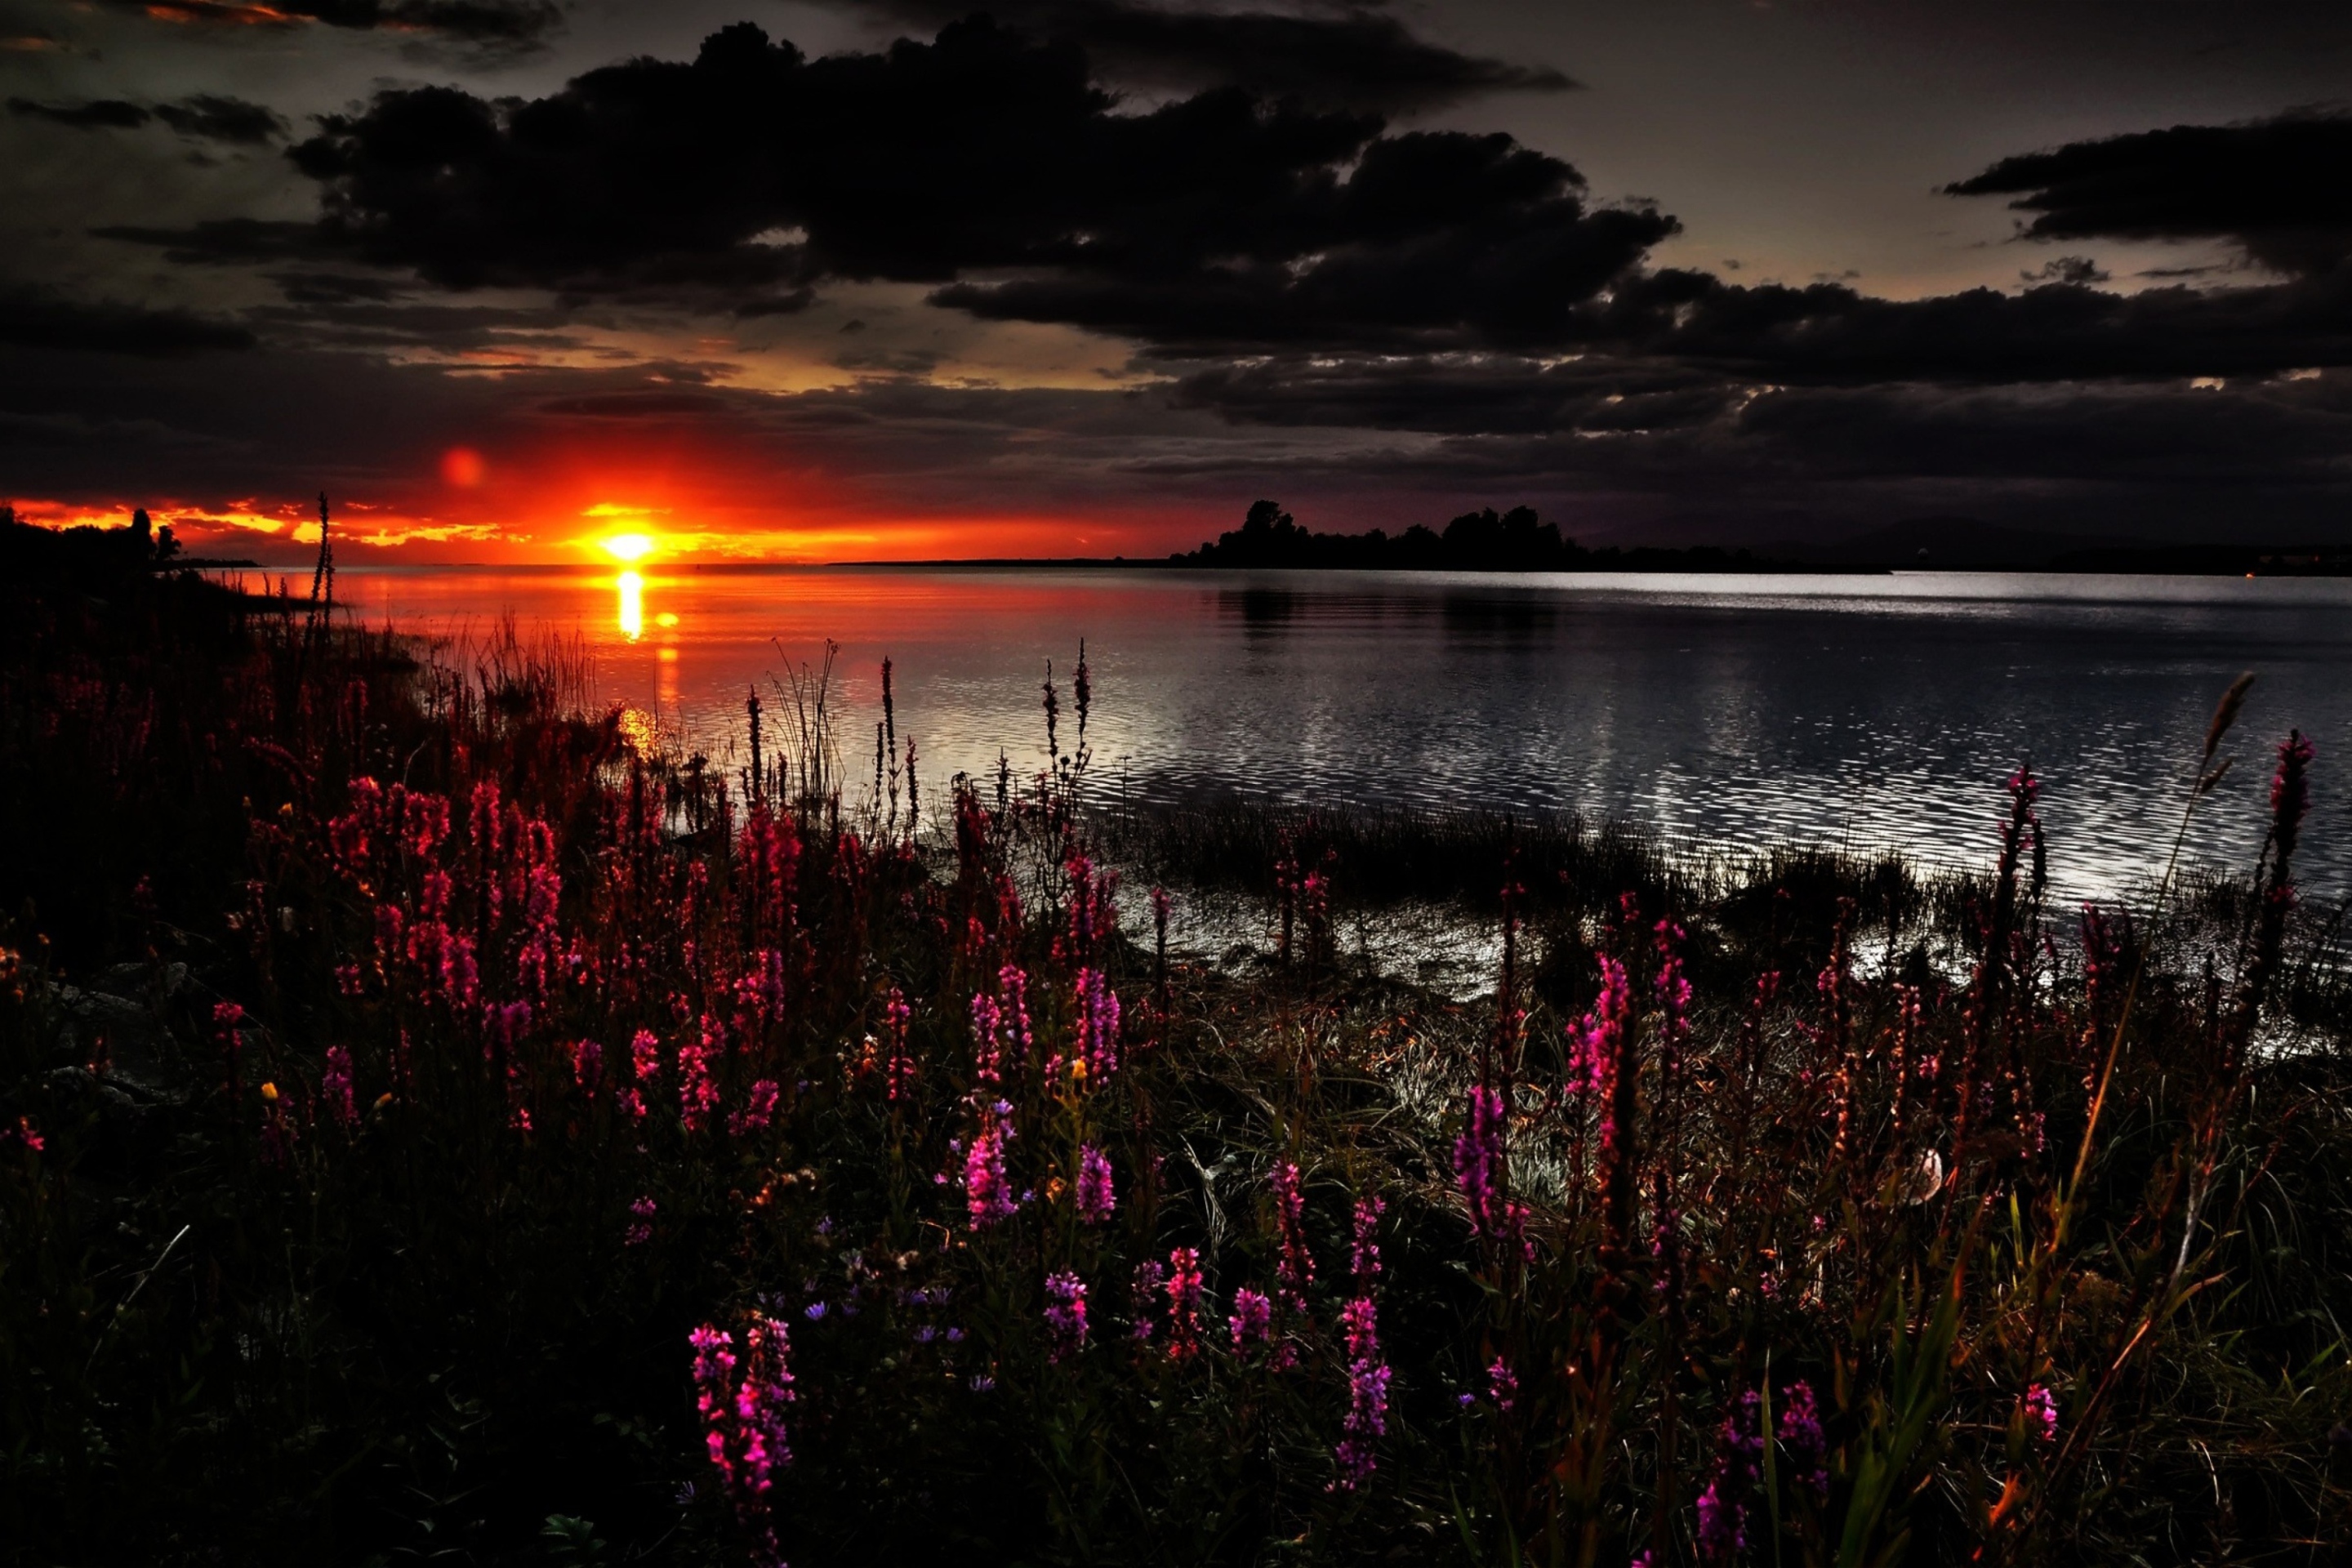 Flowers And Lake At Sunset wallpaper 2880x1920